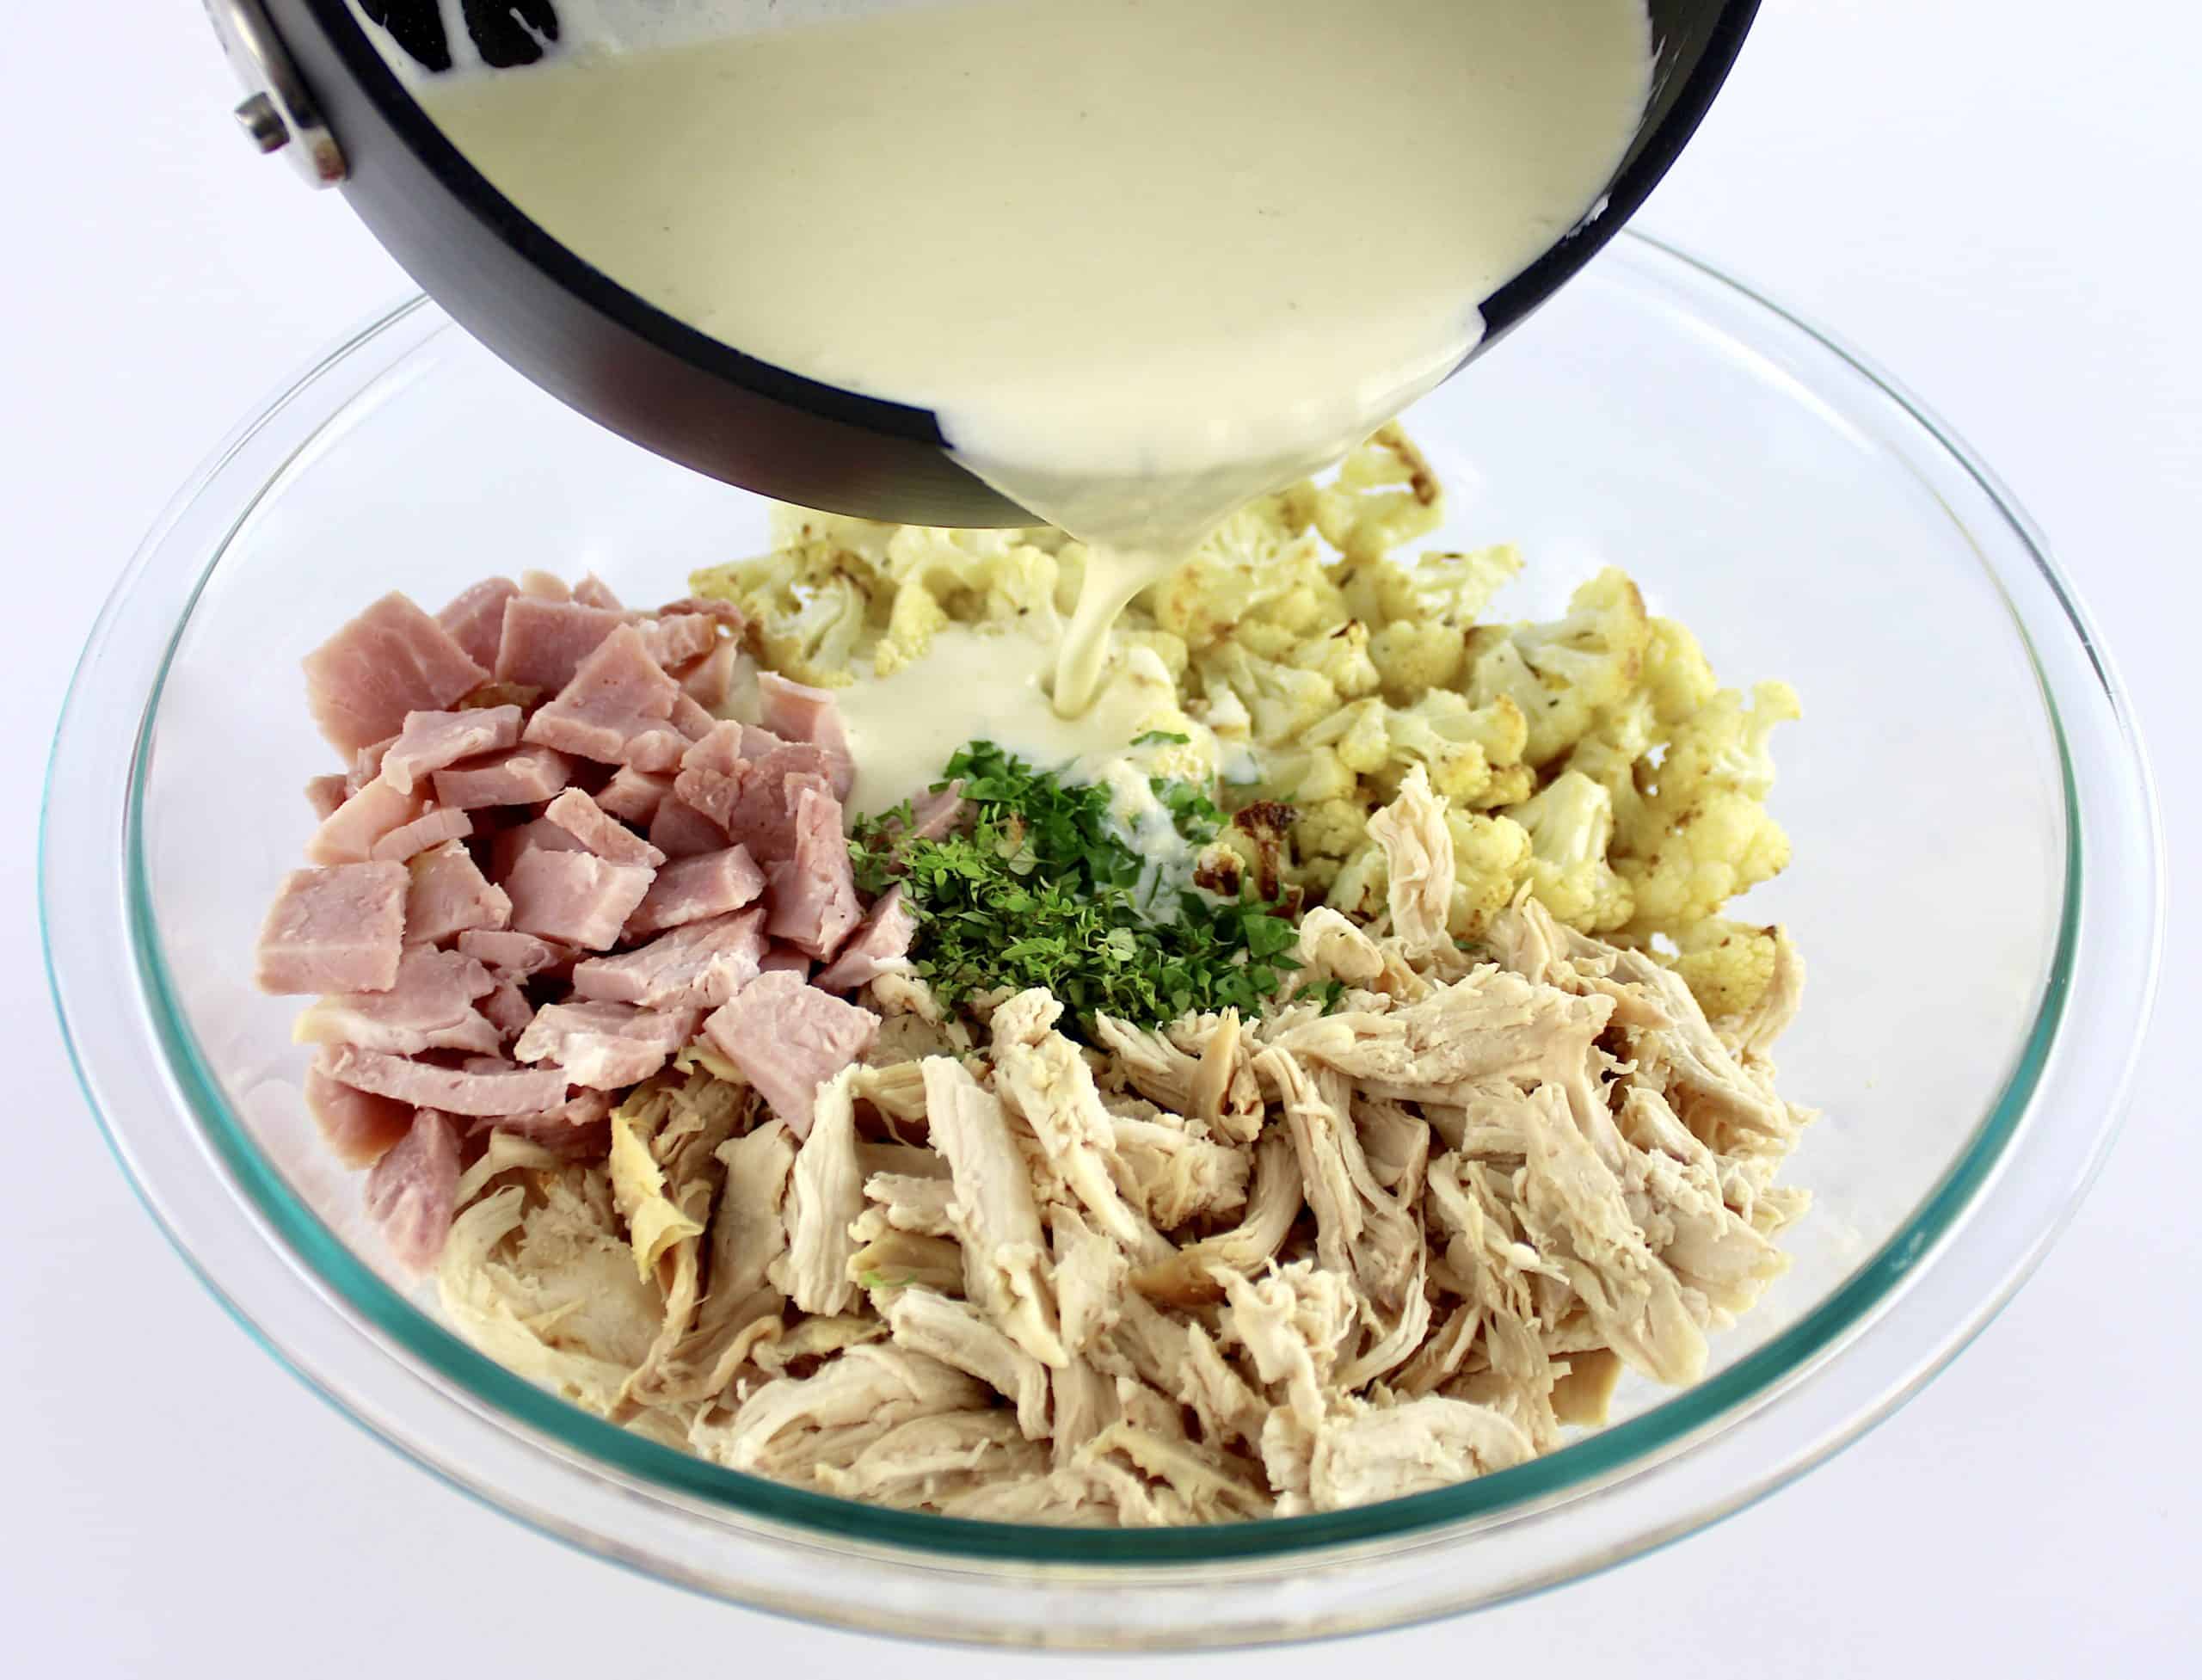 cheese sauce being poured over chicken ham and roasted cauliflower in glass bowl